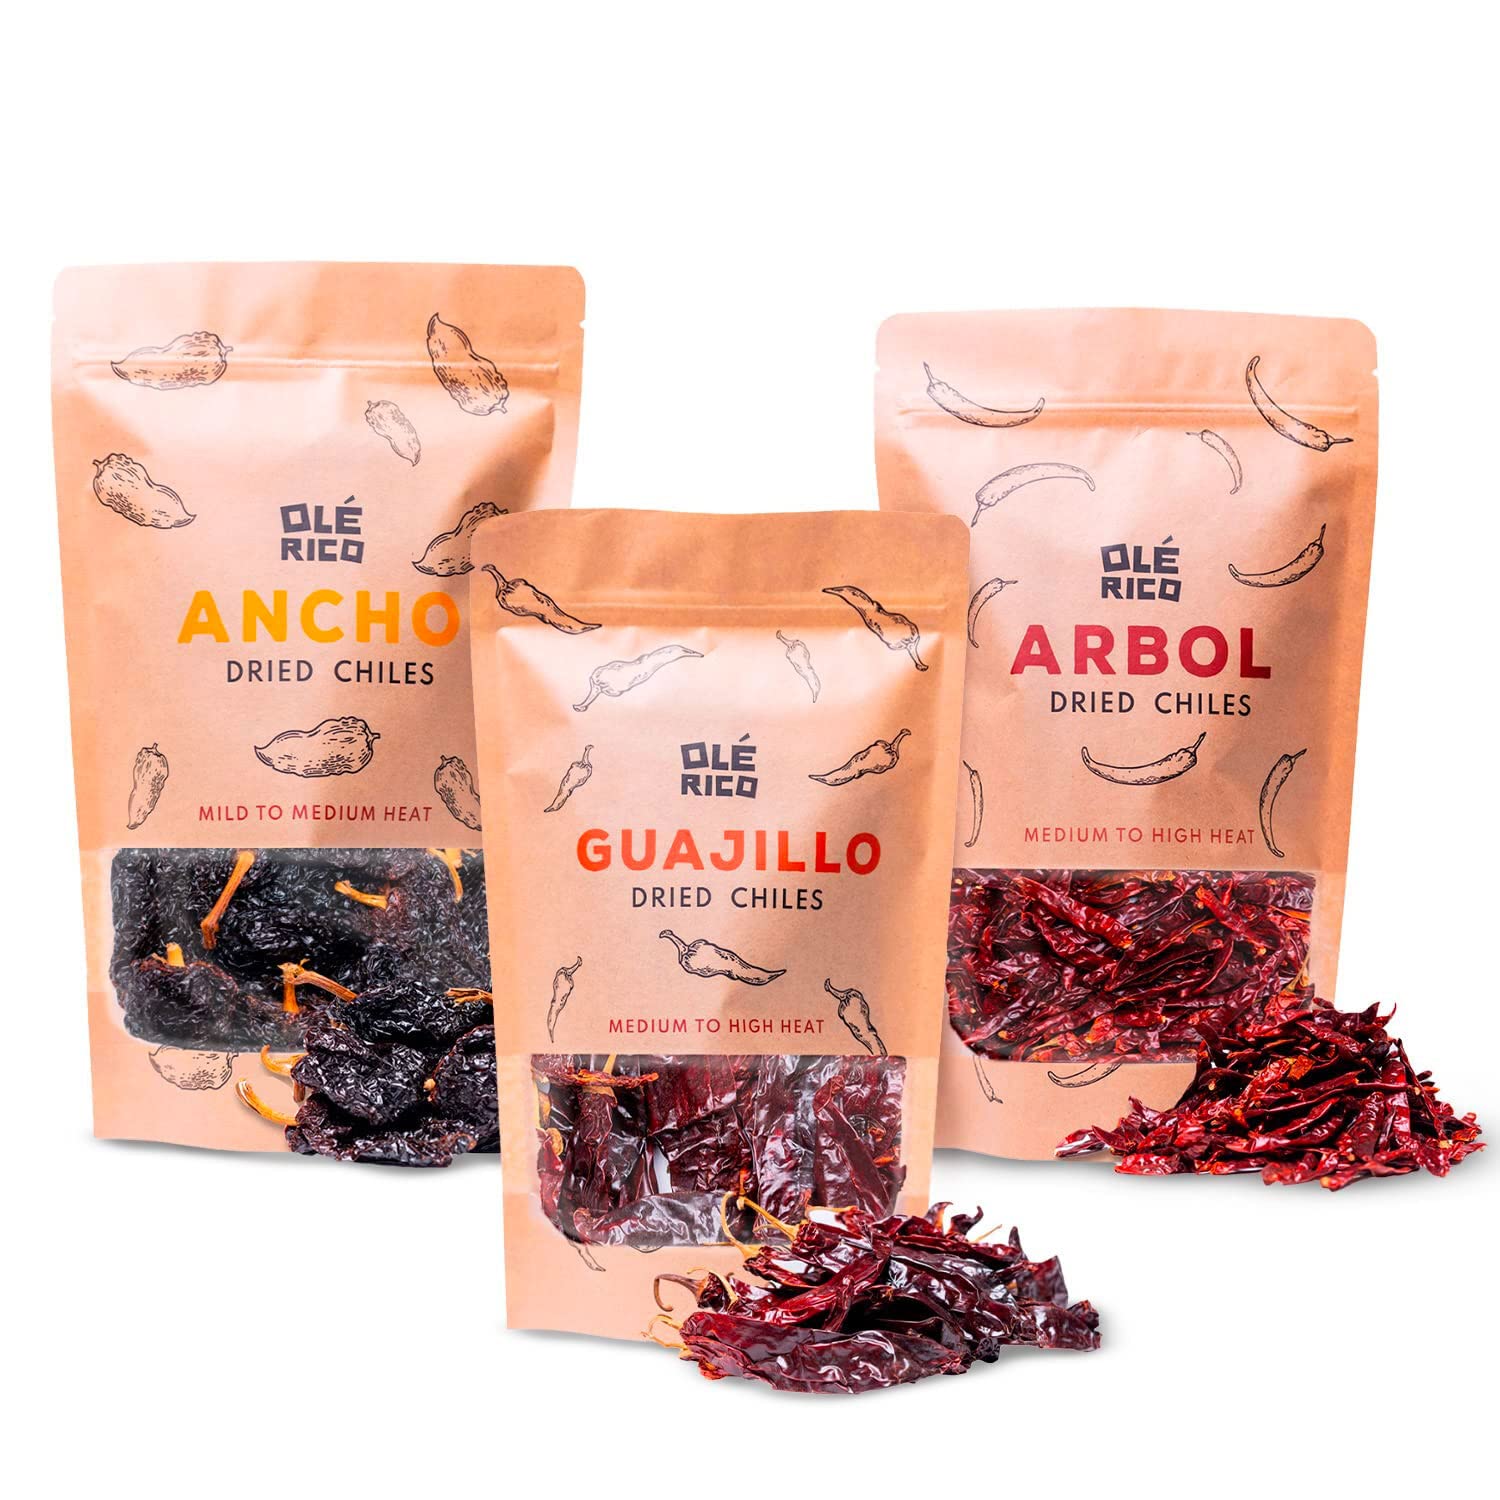 OLÉ RICO - Dried Chile Peppers 3 Pack Bundle (12 oz Total) - Ancho Chiles, Guajillo Chiles and Arbol Chiles - The Spicy Trio - Great For Mexican Recipes - Packaged In Resealable Bags - image 1 of 9